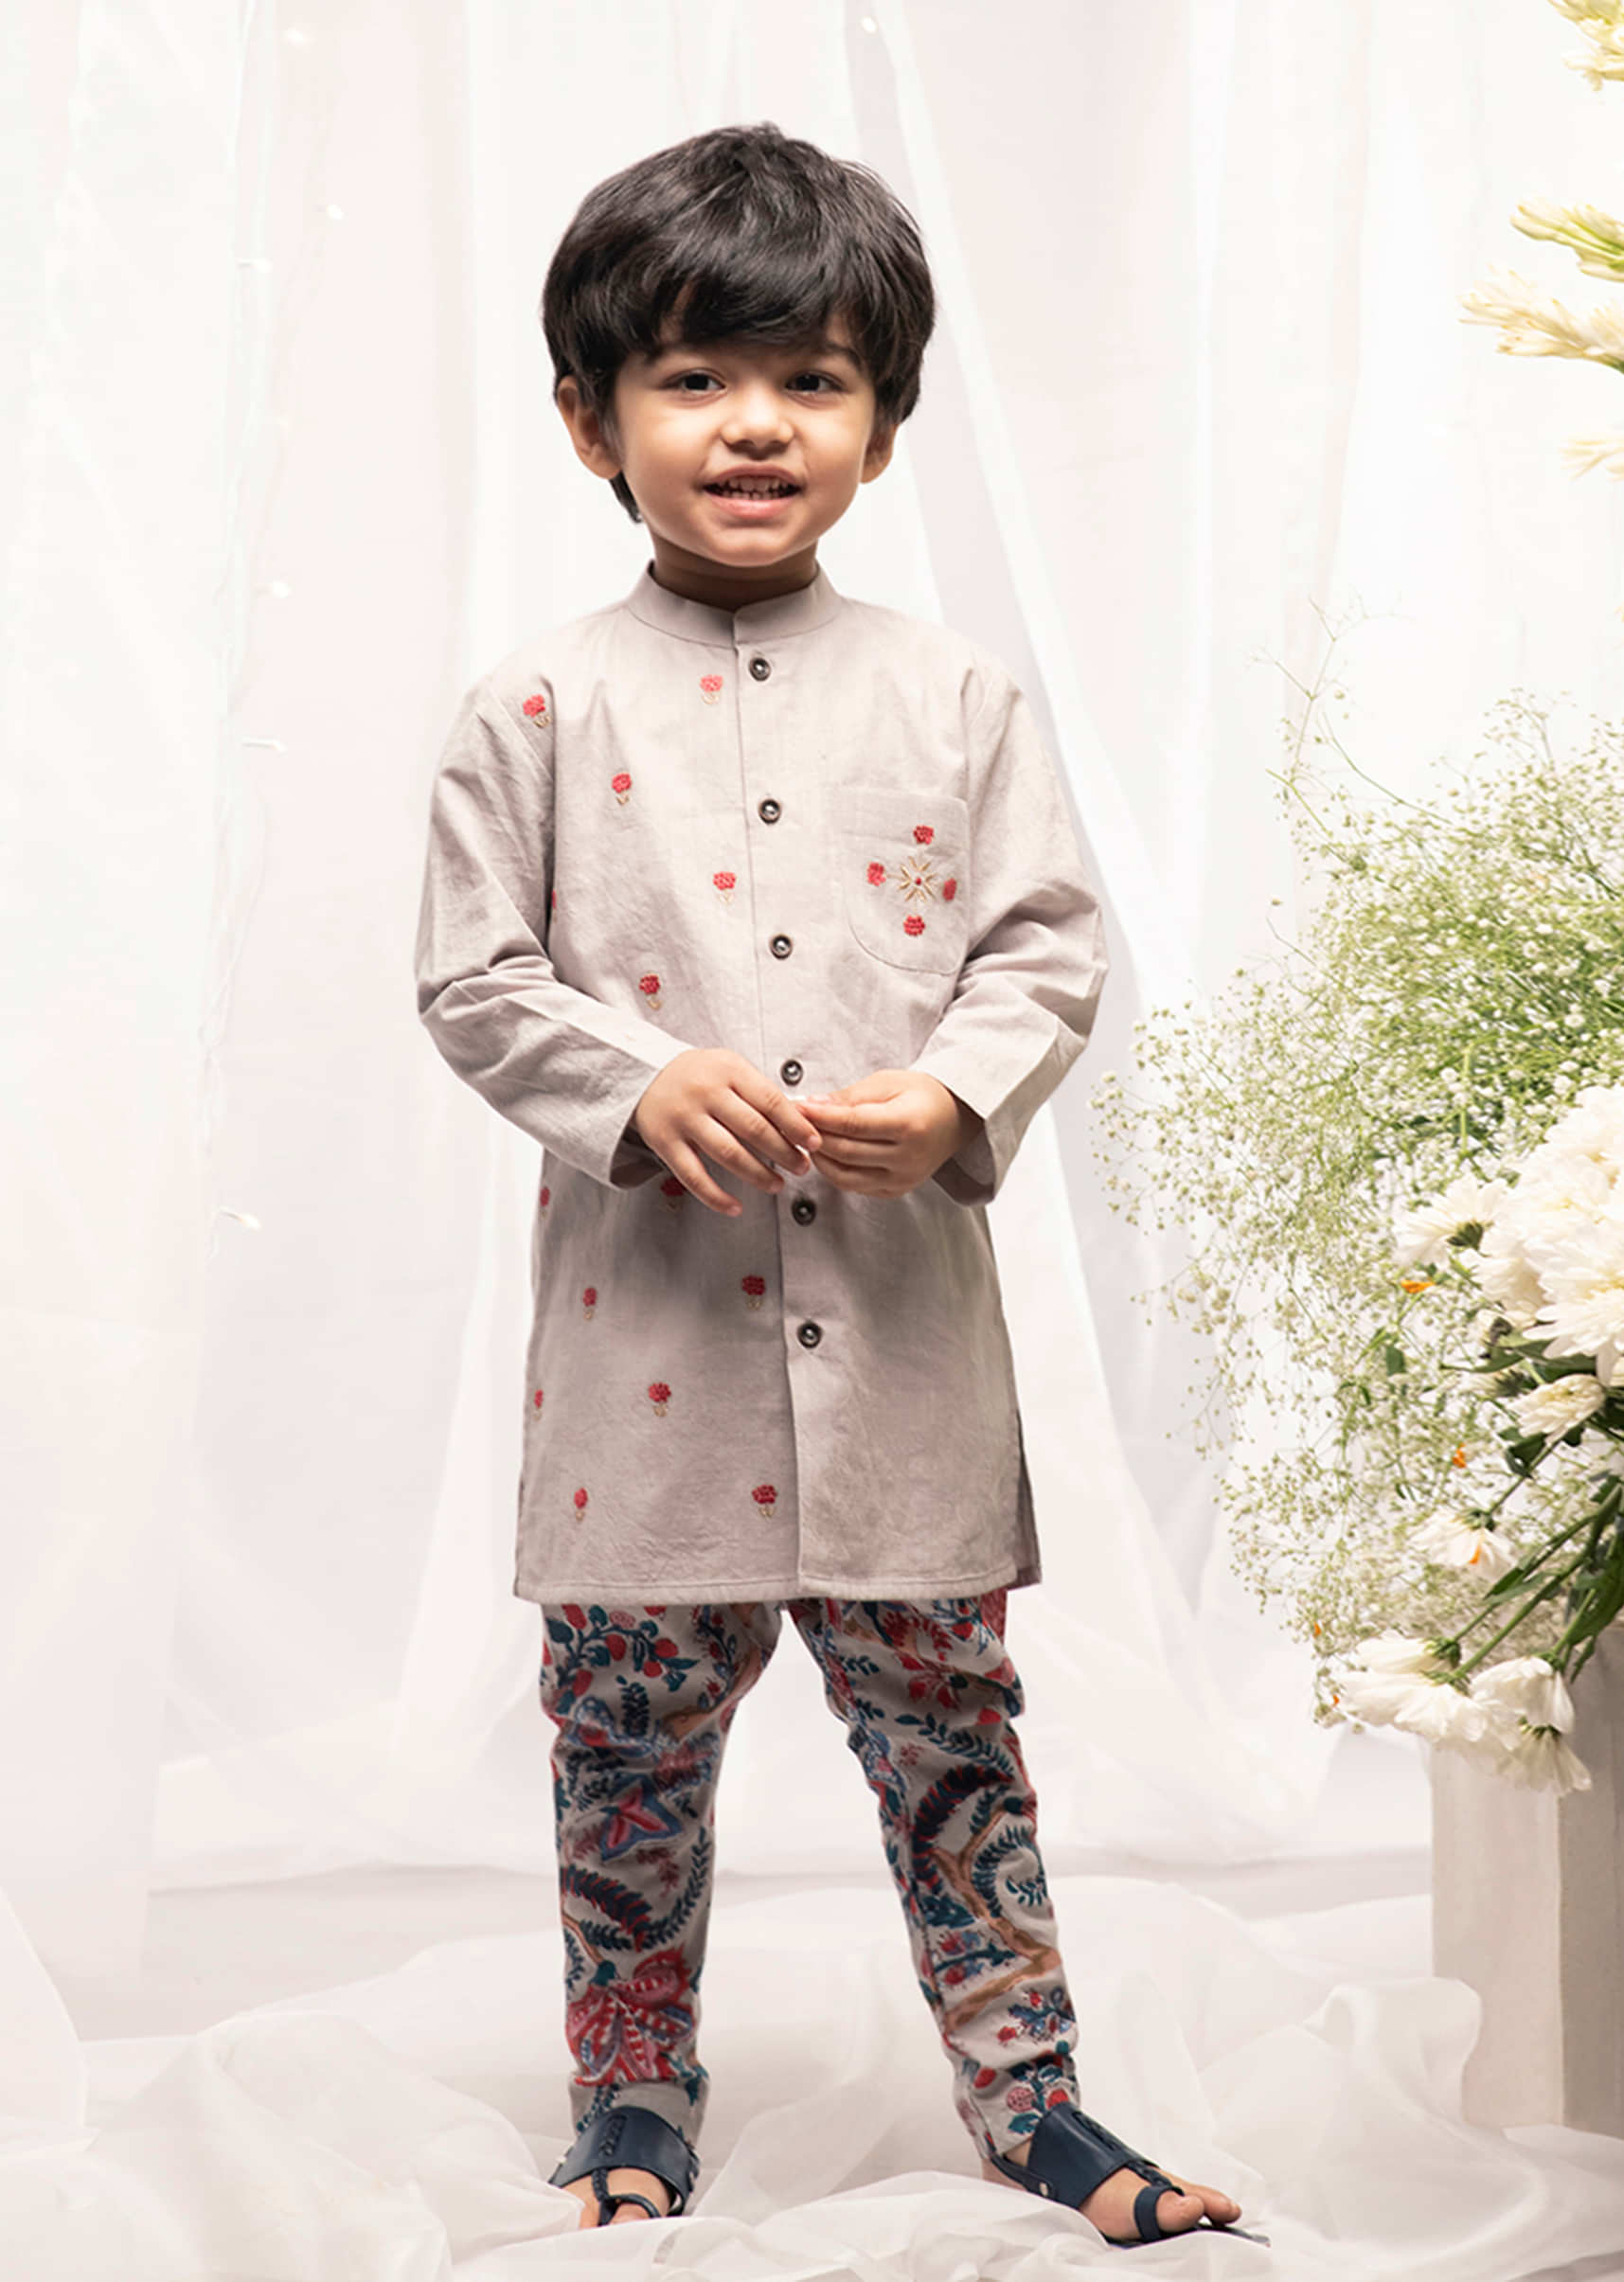 Kalki Boys Grey Kurta Set In Cotton With Embroidered Buttis And Floral Printed Churidar By Tiber Taber